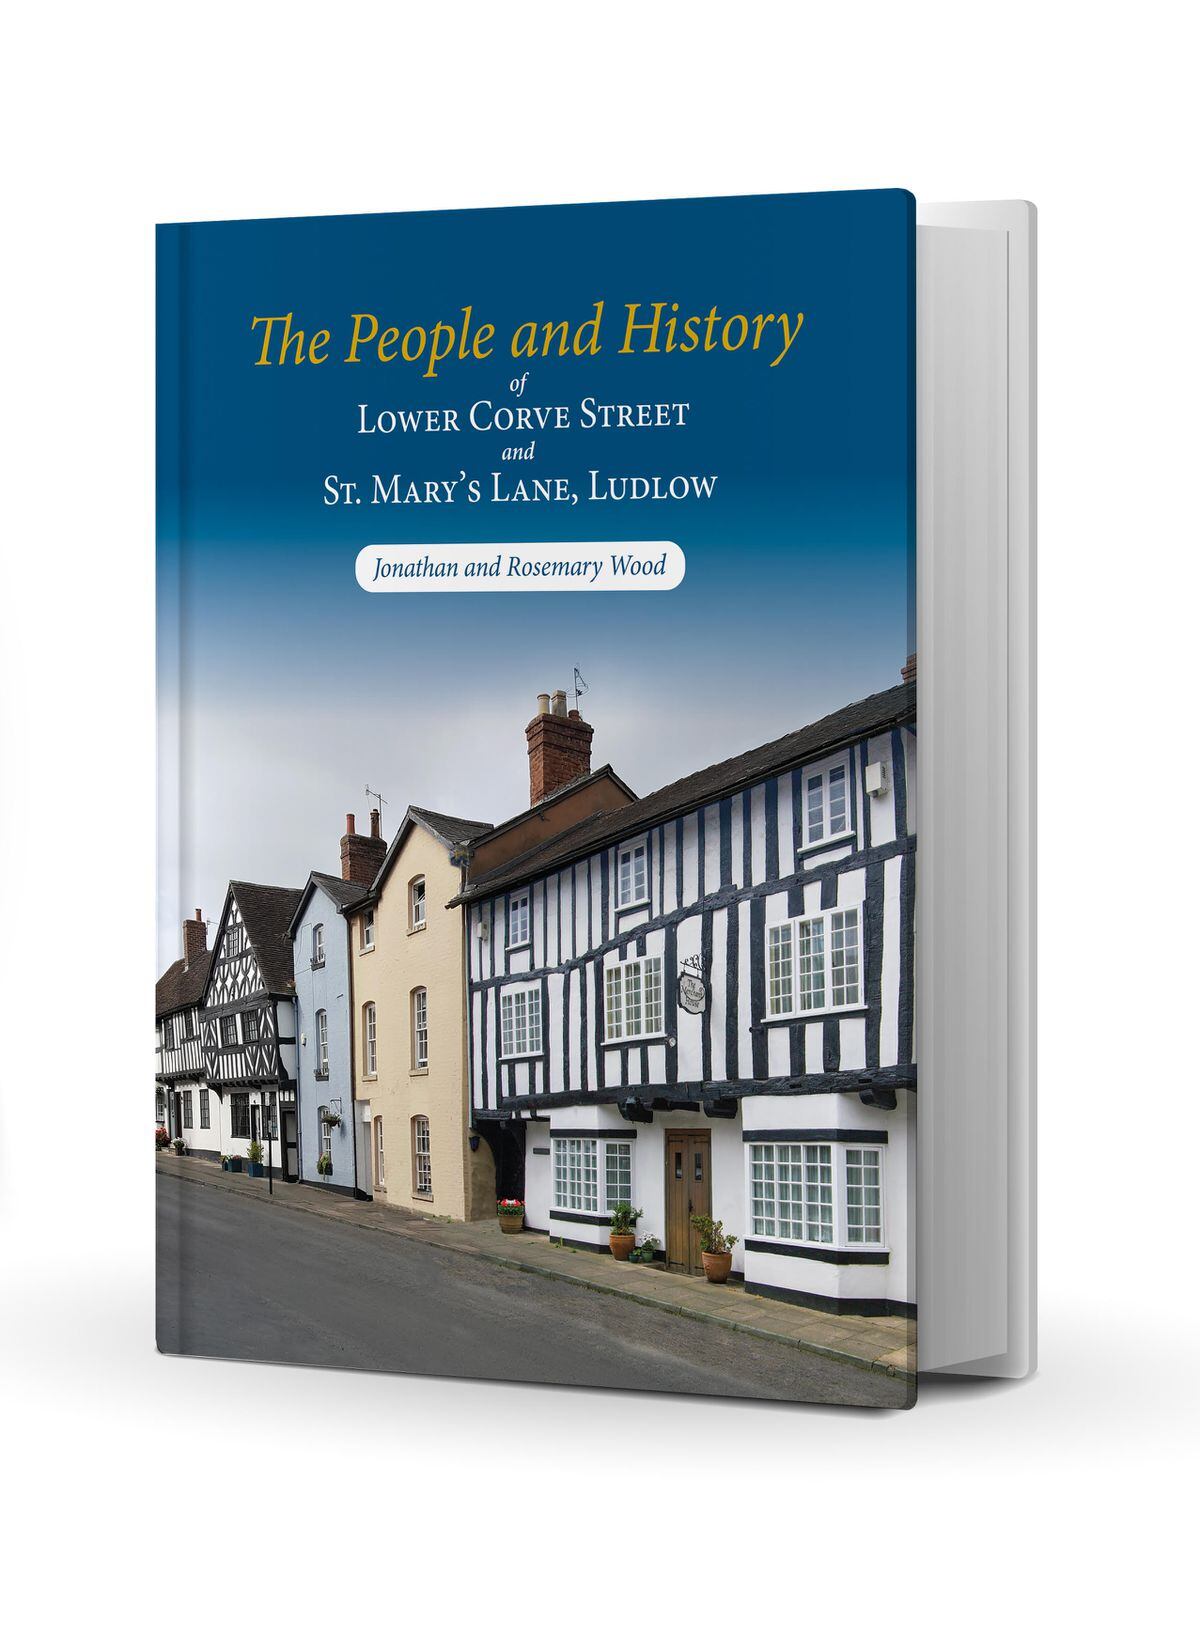 Front cover of The People and History of Lower Corve Street, Ludlow